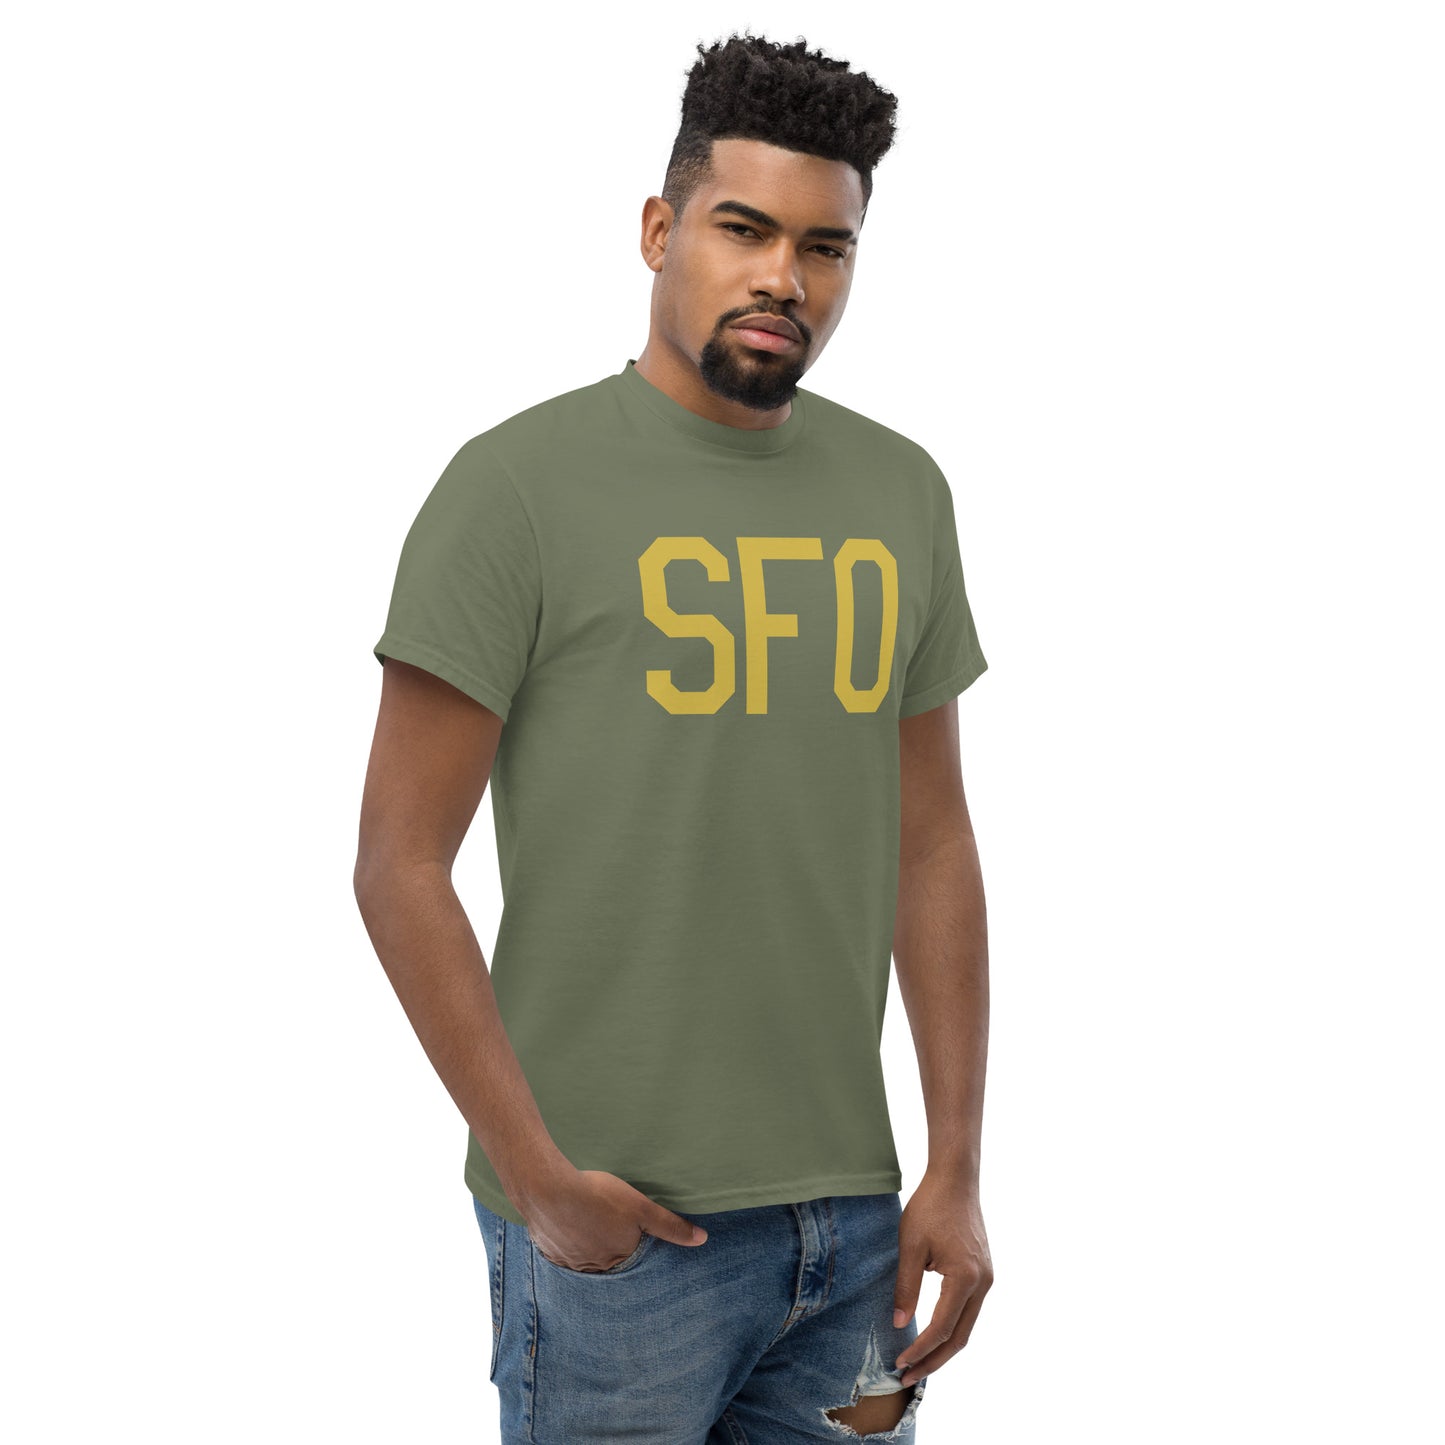 Aviation Enthusiast Men's Tee - Old Gold Graphic • SFO San Francisco • YHM Designs - Image 08